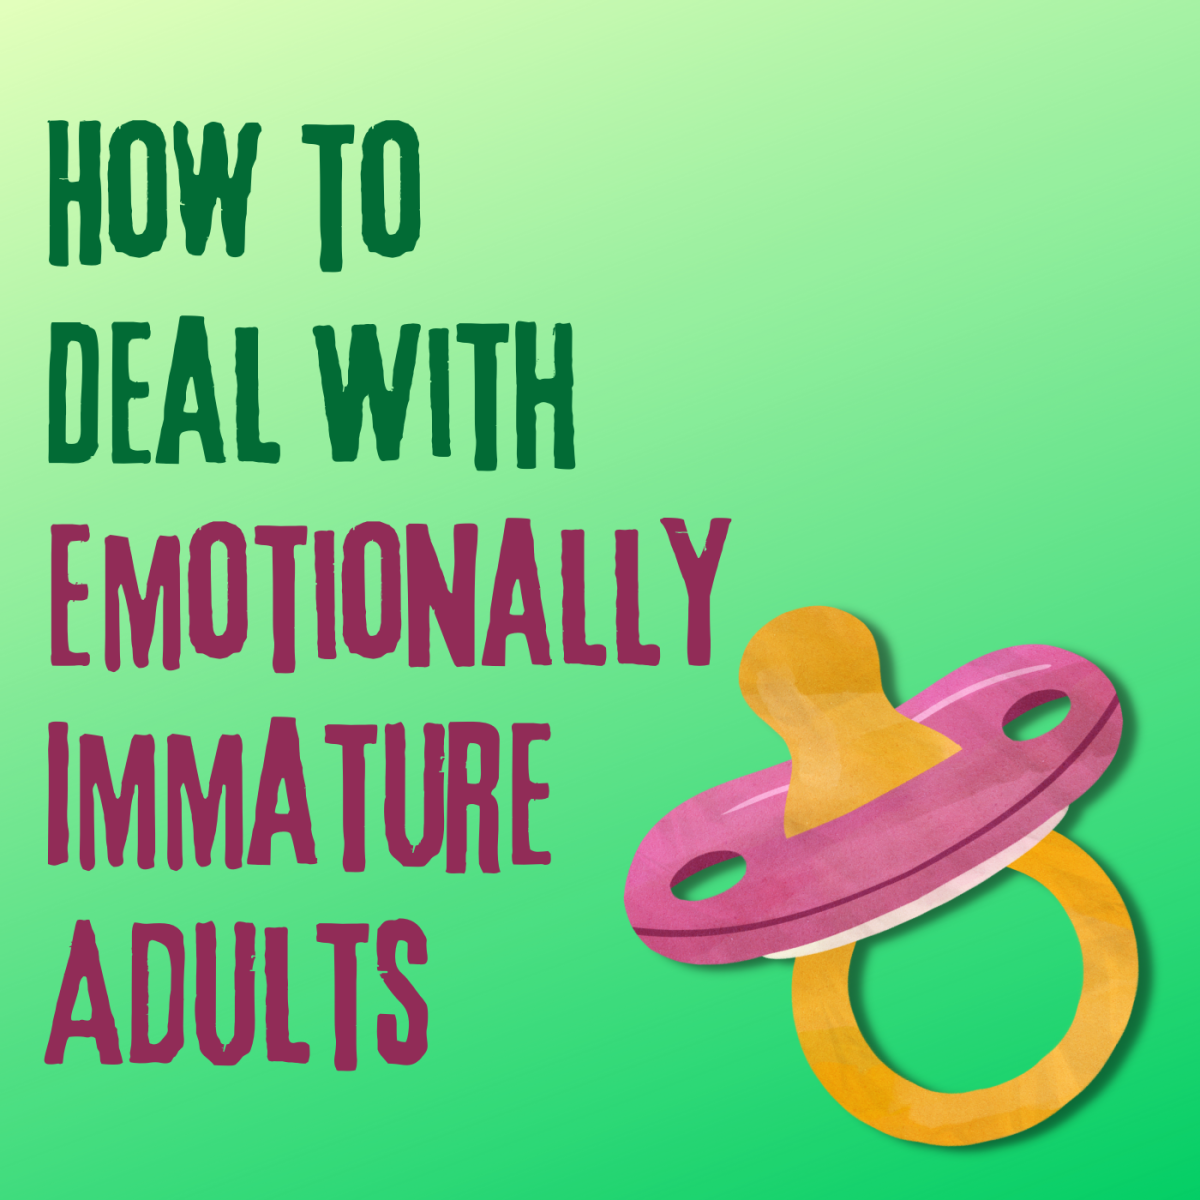 5 Tips for Dealing With Immature Adults